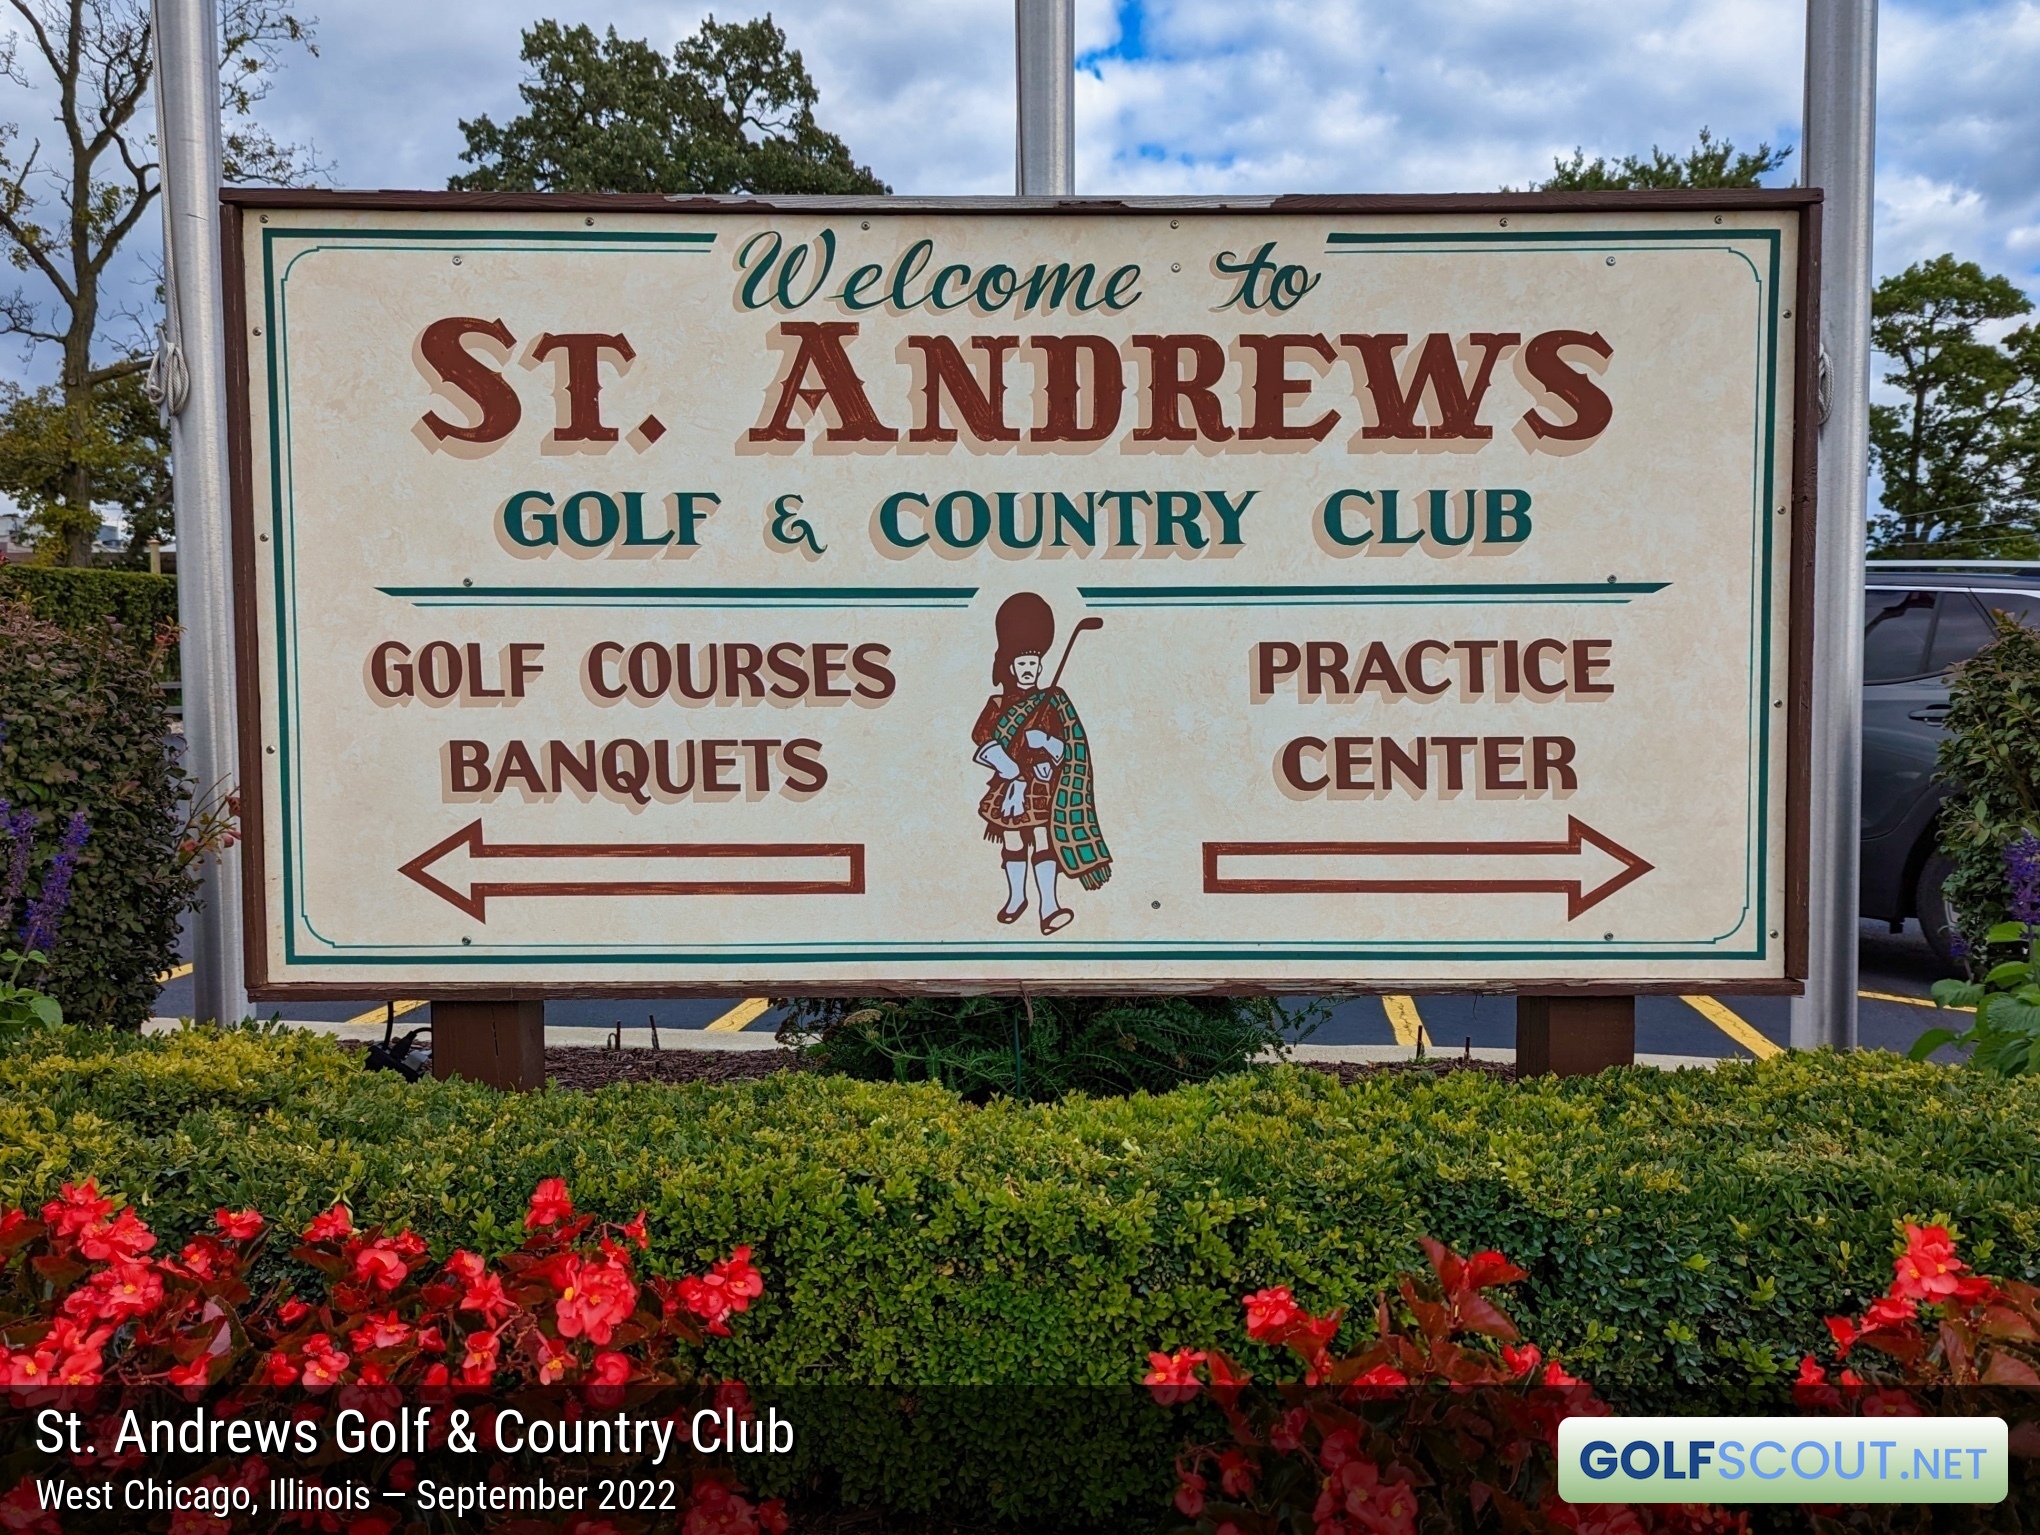 Sign at the entrance to St. Andrews - Joe Jemsek Course